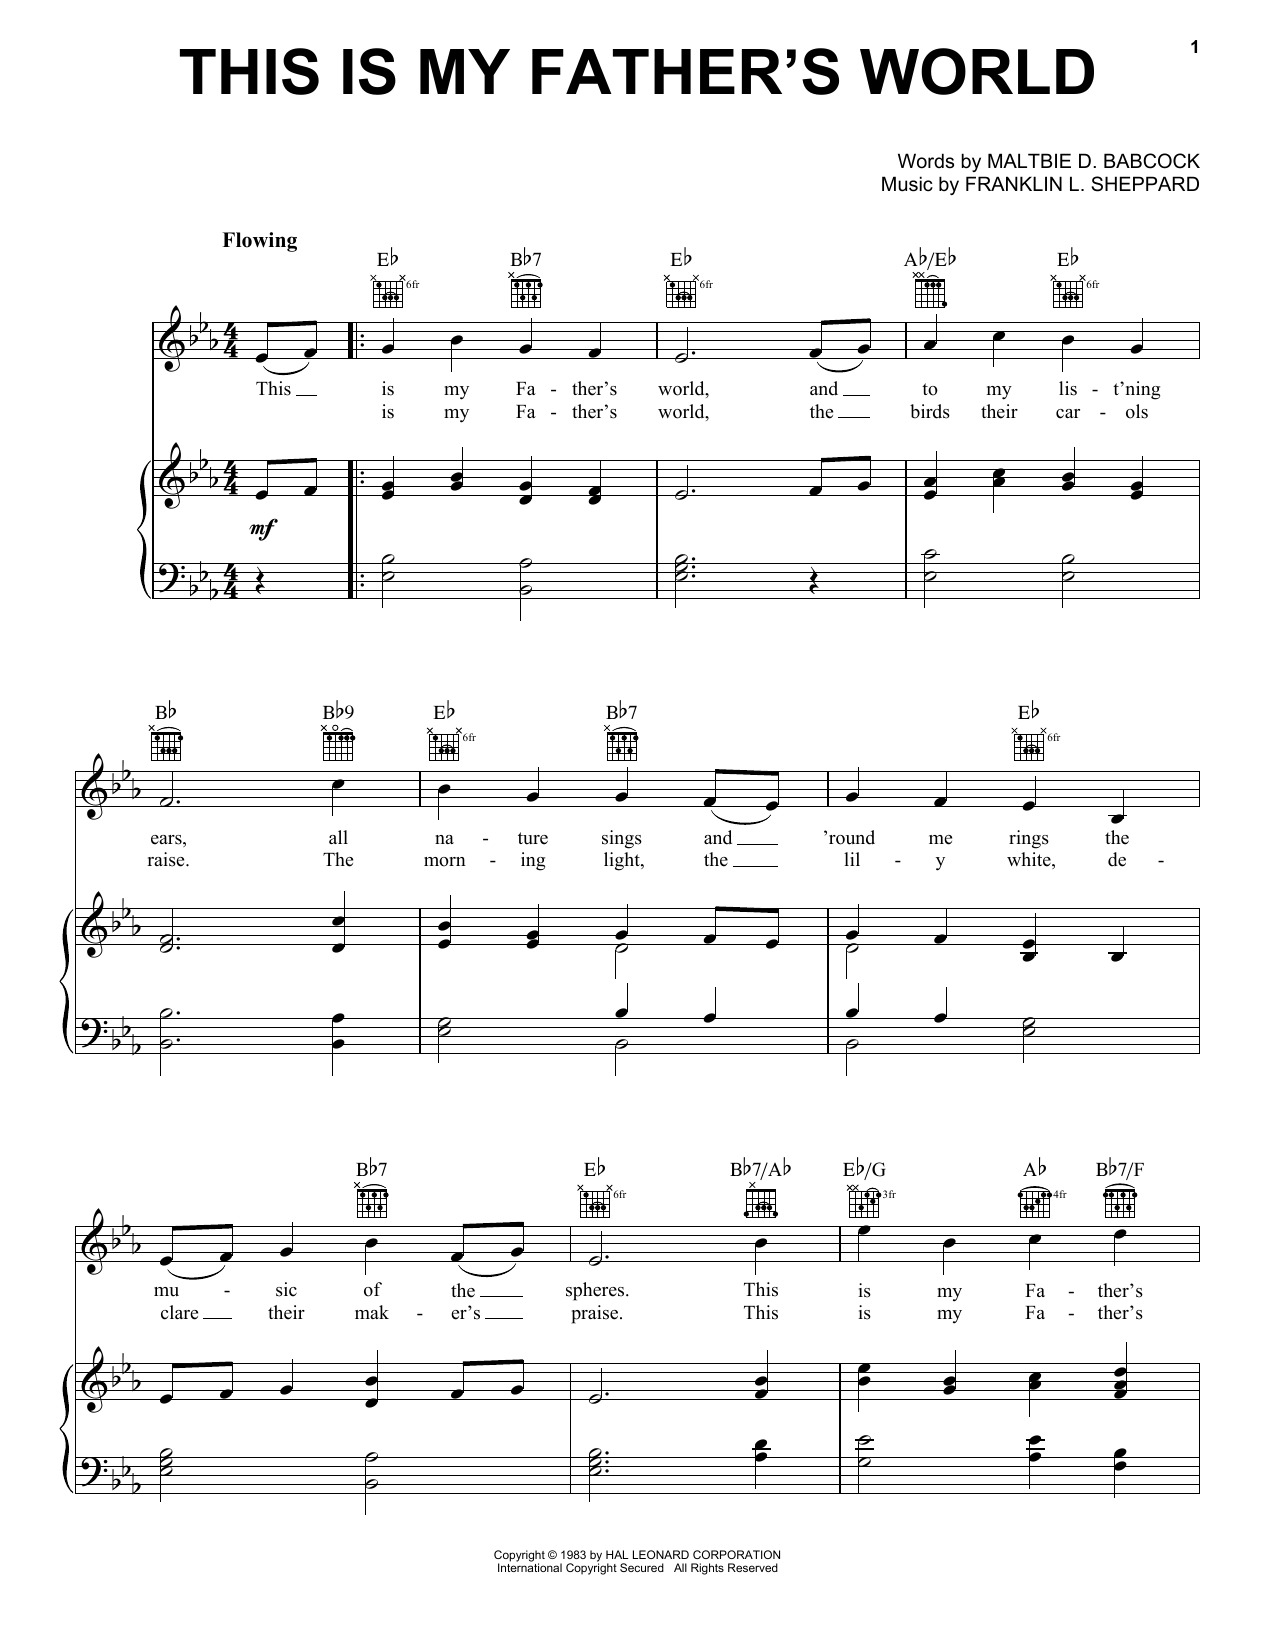 Maltbie D. Babcock This Is My Father's World sheet music notes printable PDF score